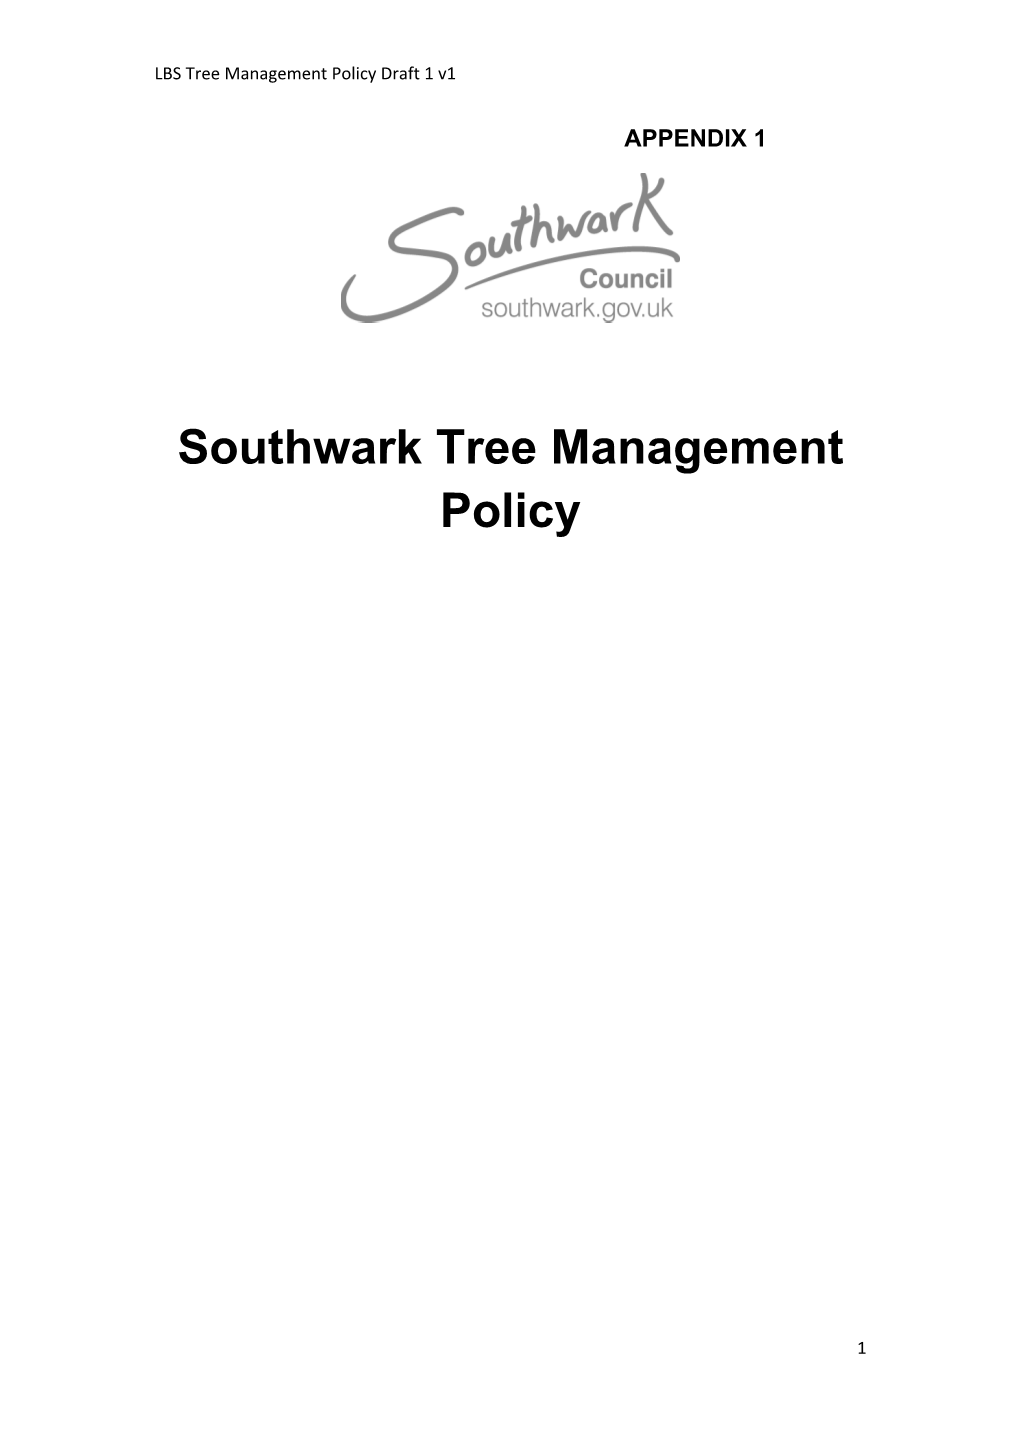 Southwark Tree Management Policy